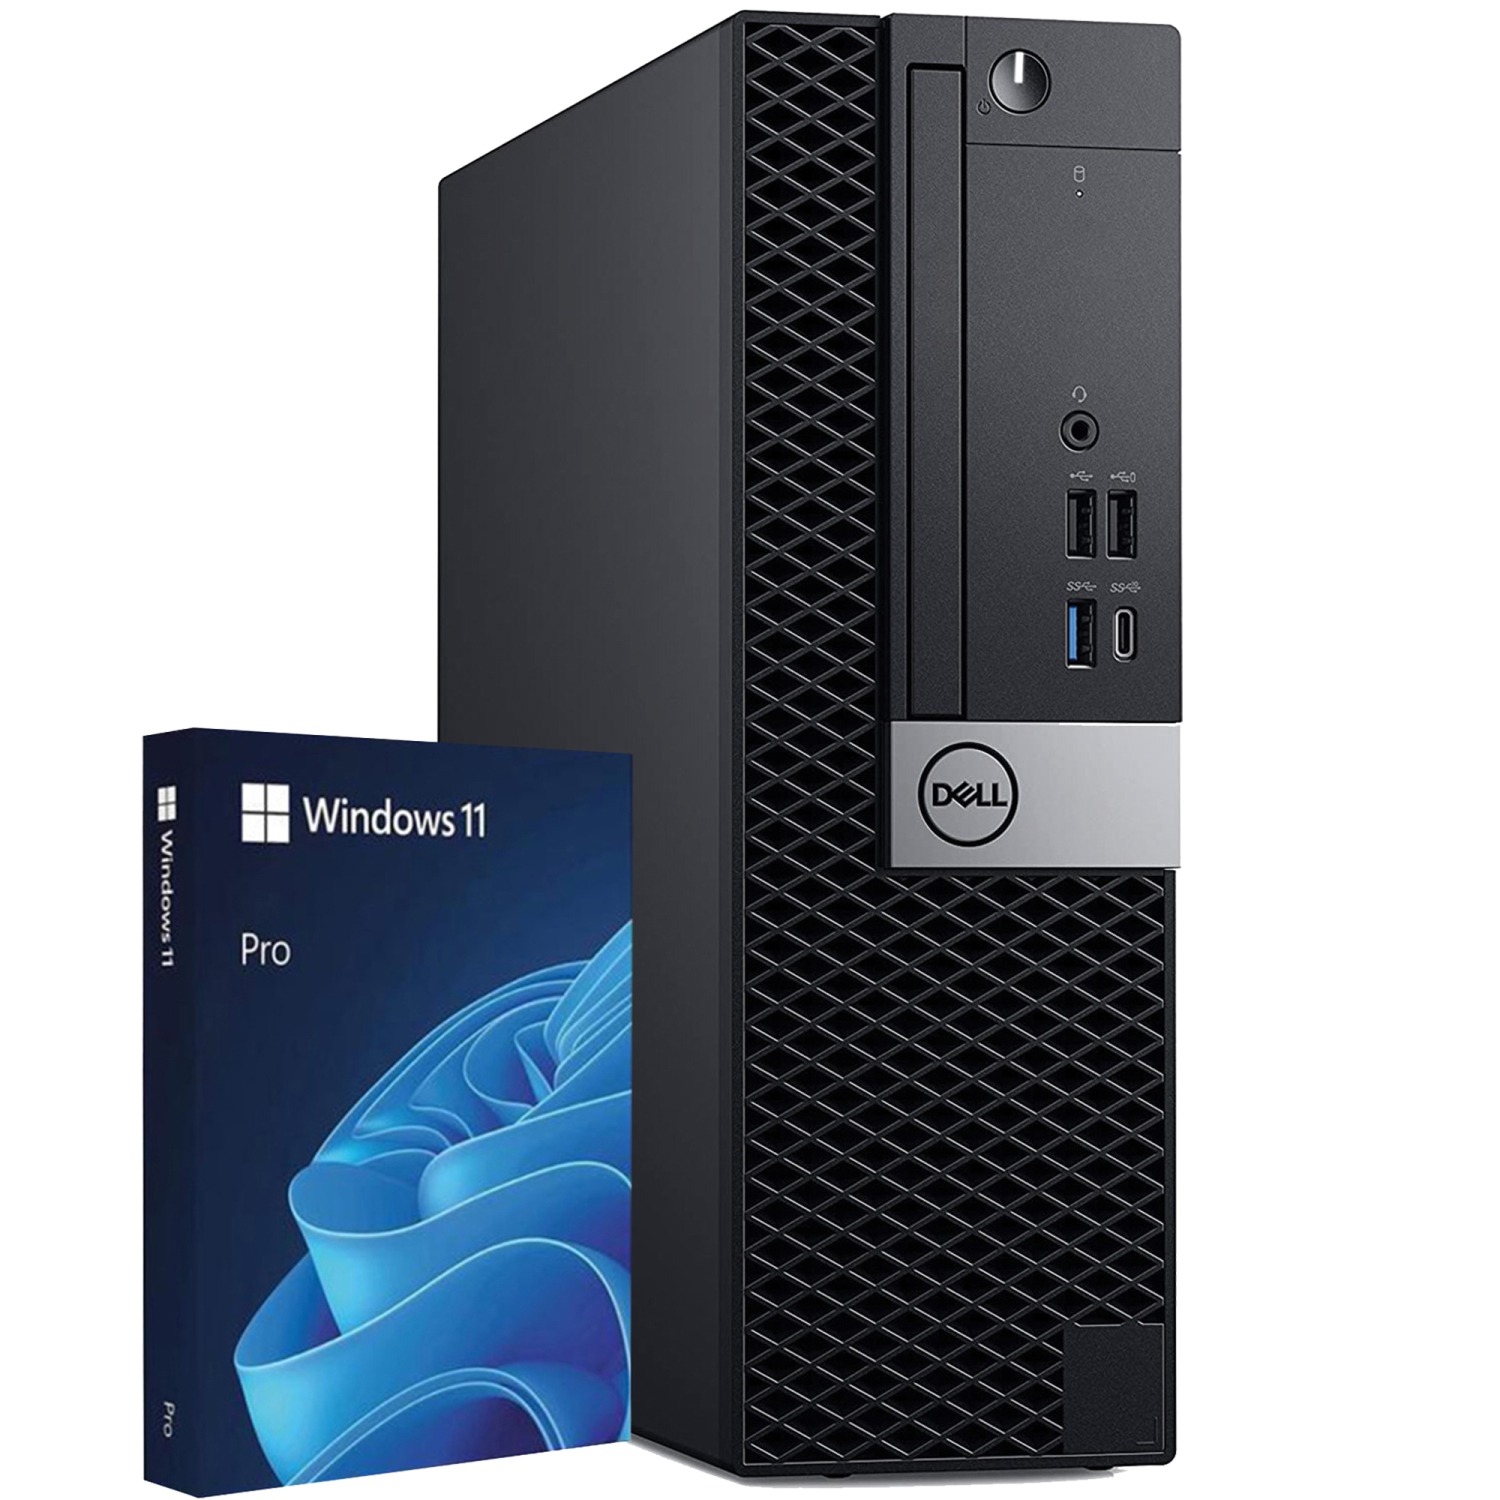 Refurbished (Good) - Dell Computers SFF Desktop Computer PC, Intel Core i5 9th Gen, 16GB RAM, 256GB M.2 NVMe SSD, Windows 11 Pro, Wireless Keyboard and Mouse WiFi Bluetooth Adapter